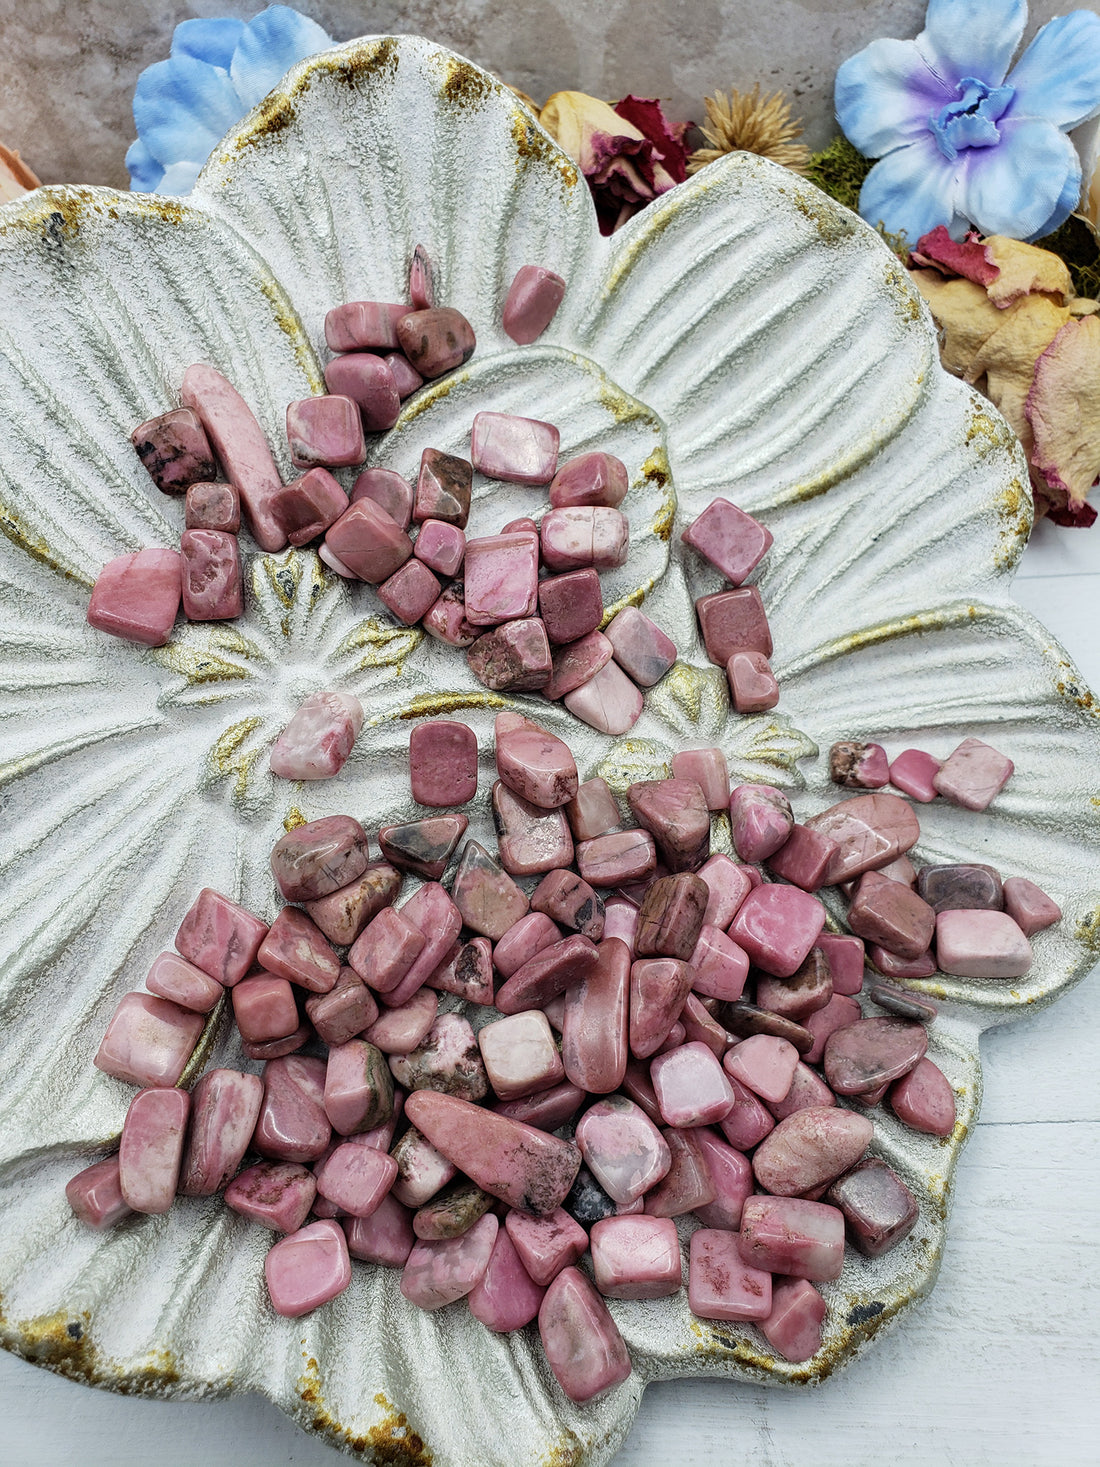 Seven ounces of rhodonite crystal chips on floral dish display